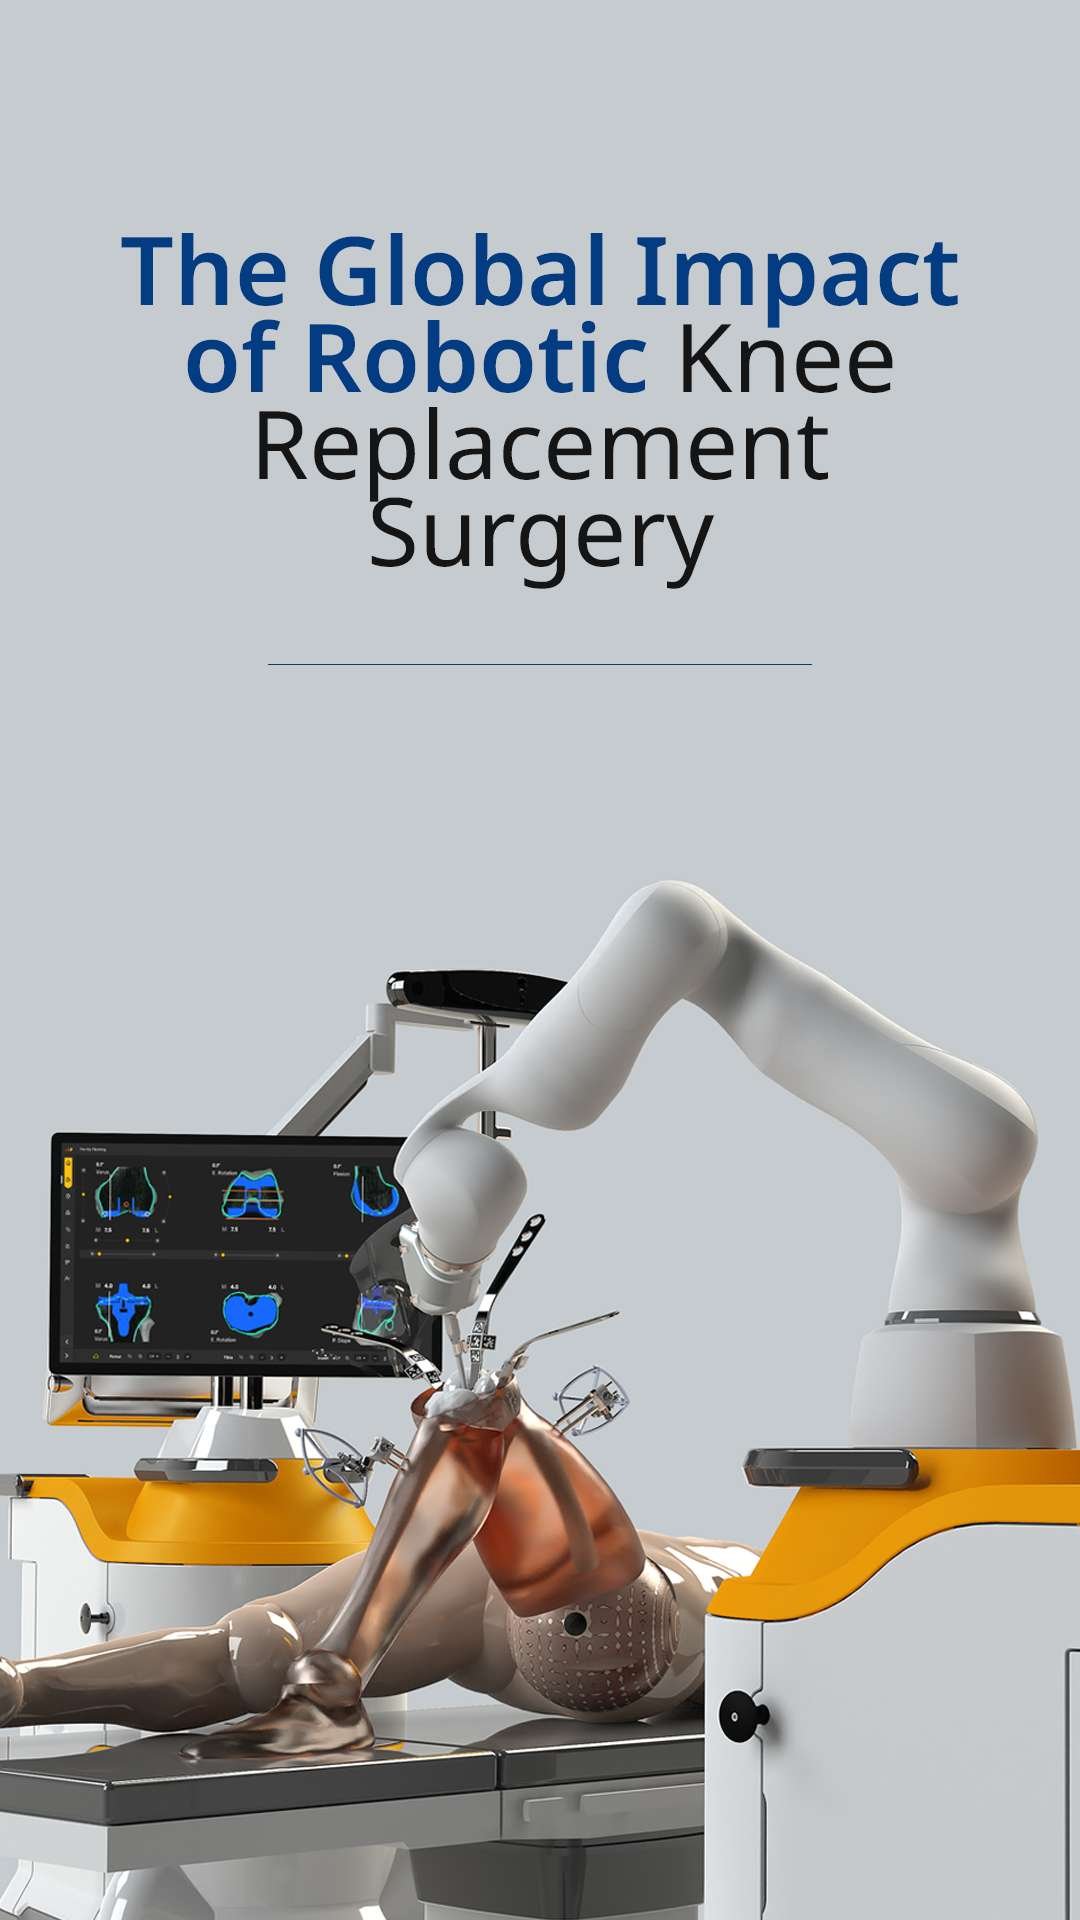 The Global impact of Robotic knee surgery